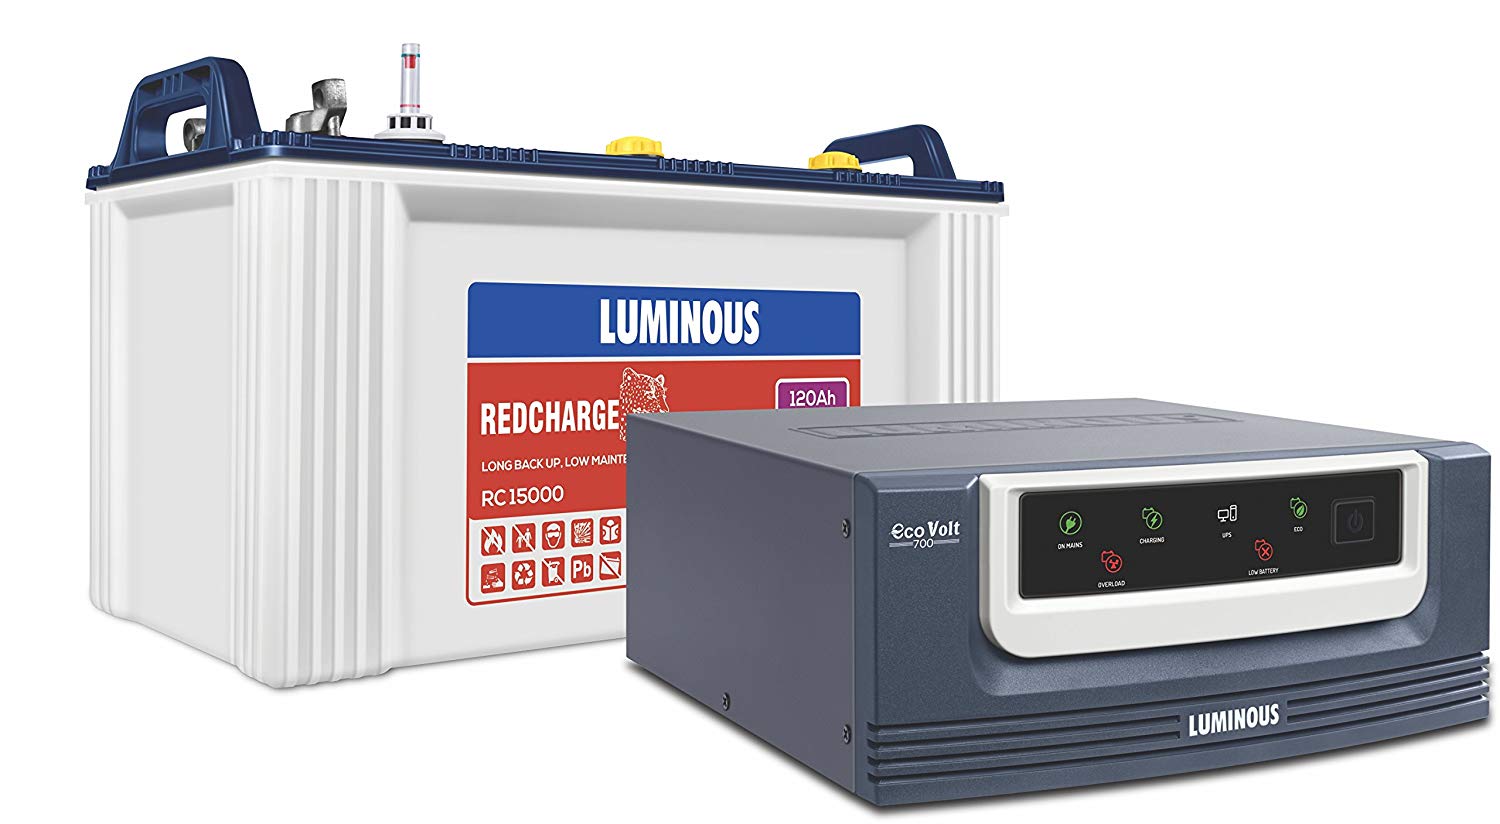 Luminous Ecovolt 700 Inverter with Red Charge 15000 Battery - Tech All